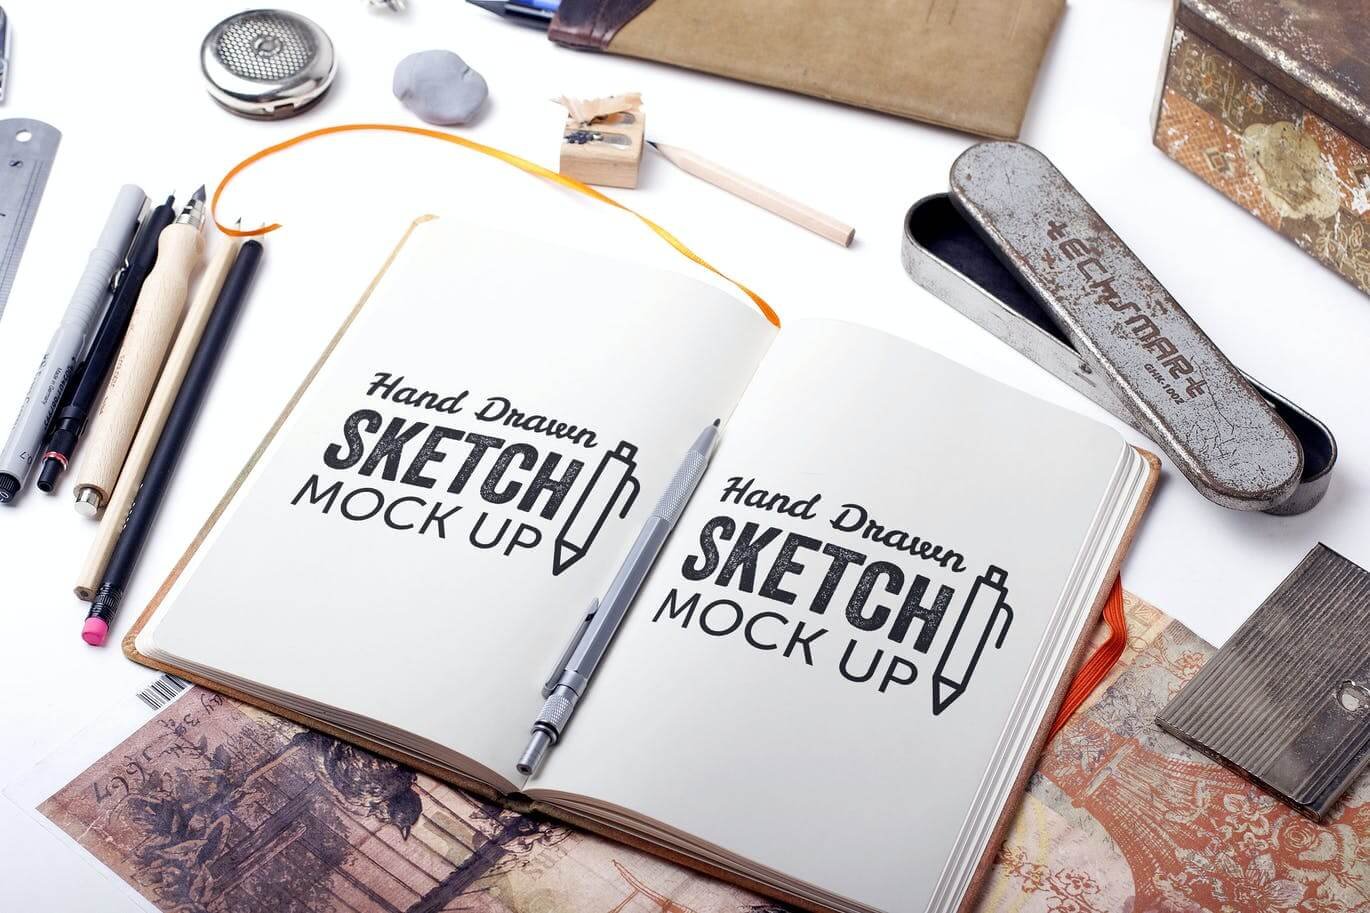 Sketch And Drawing Mockup Template #6